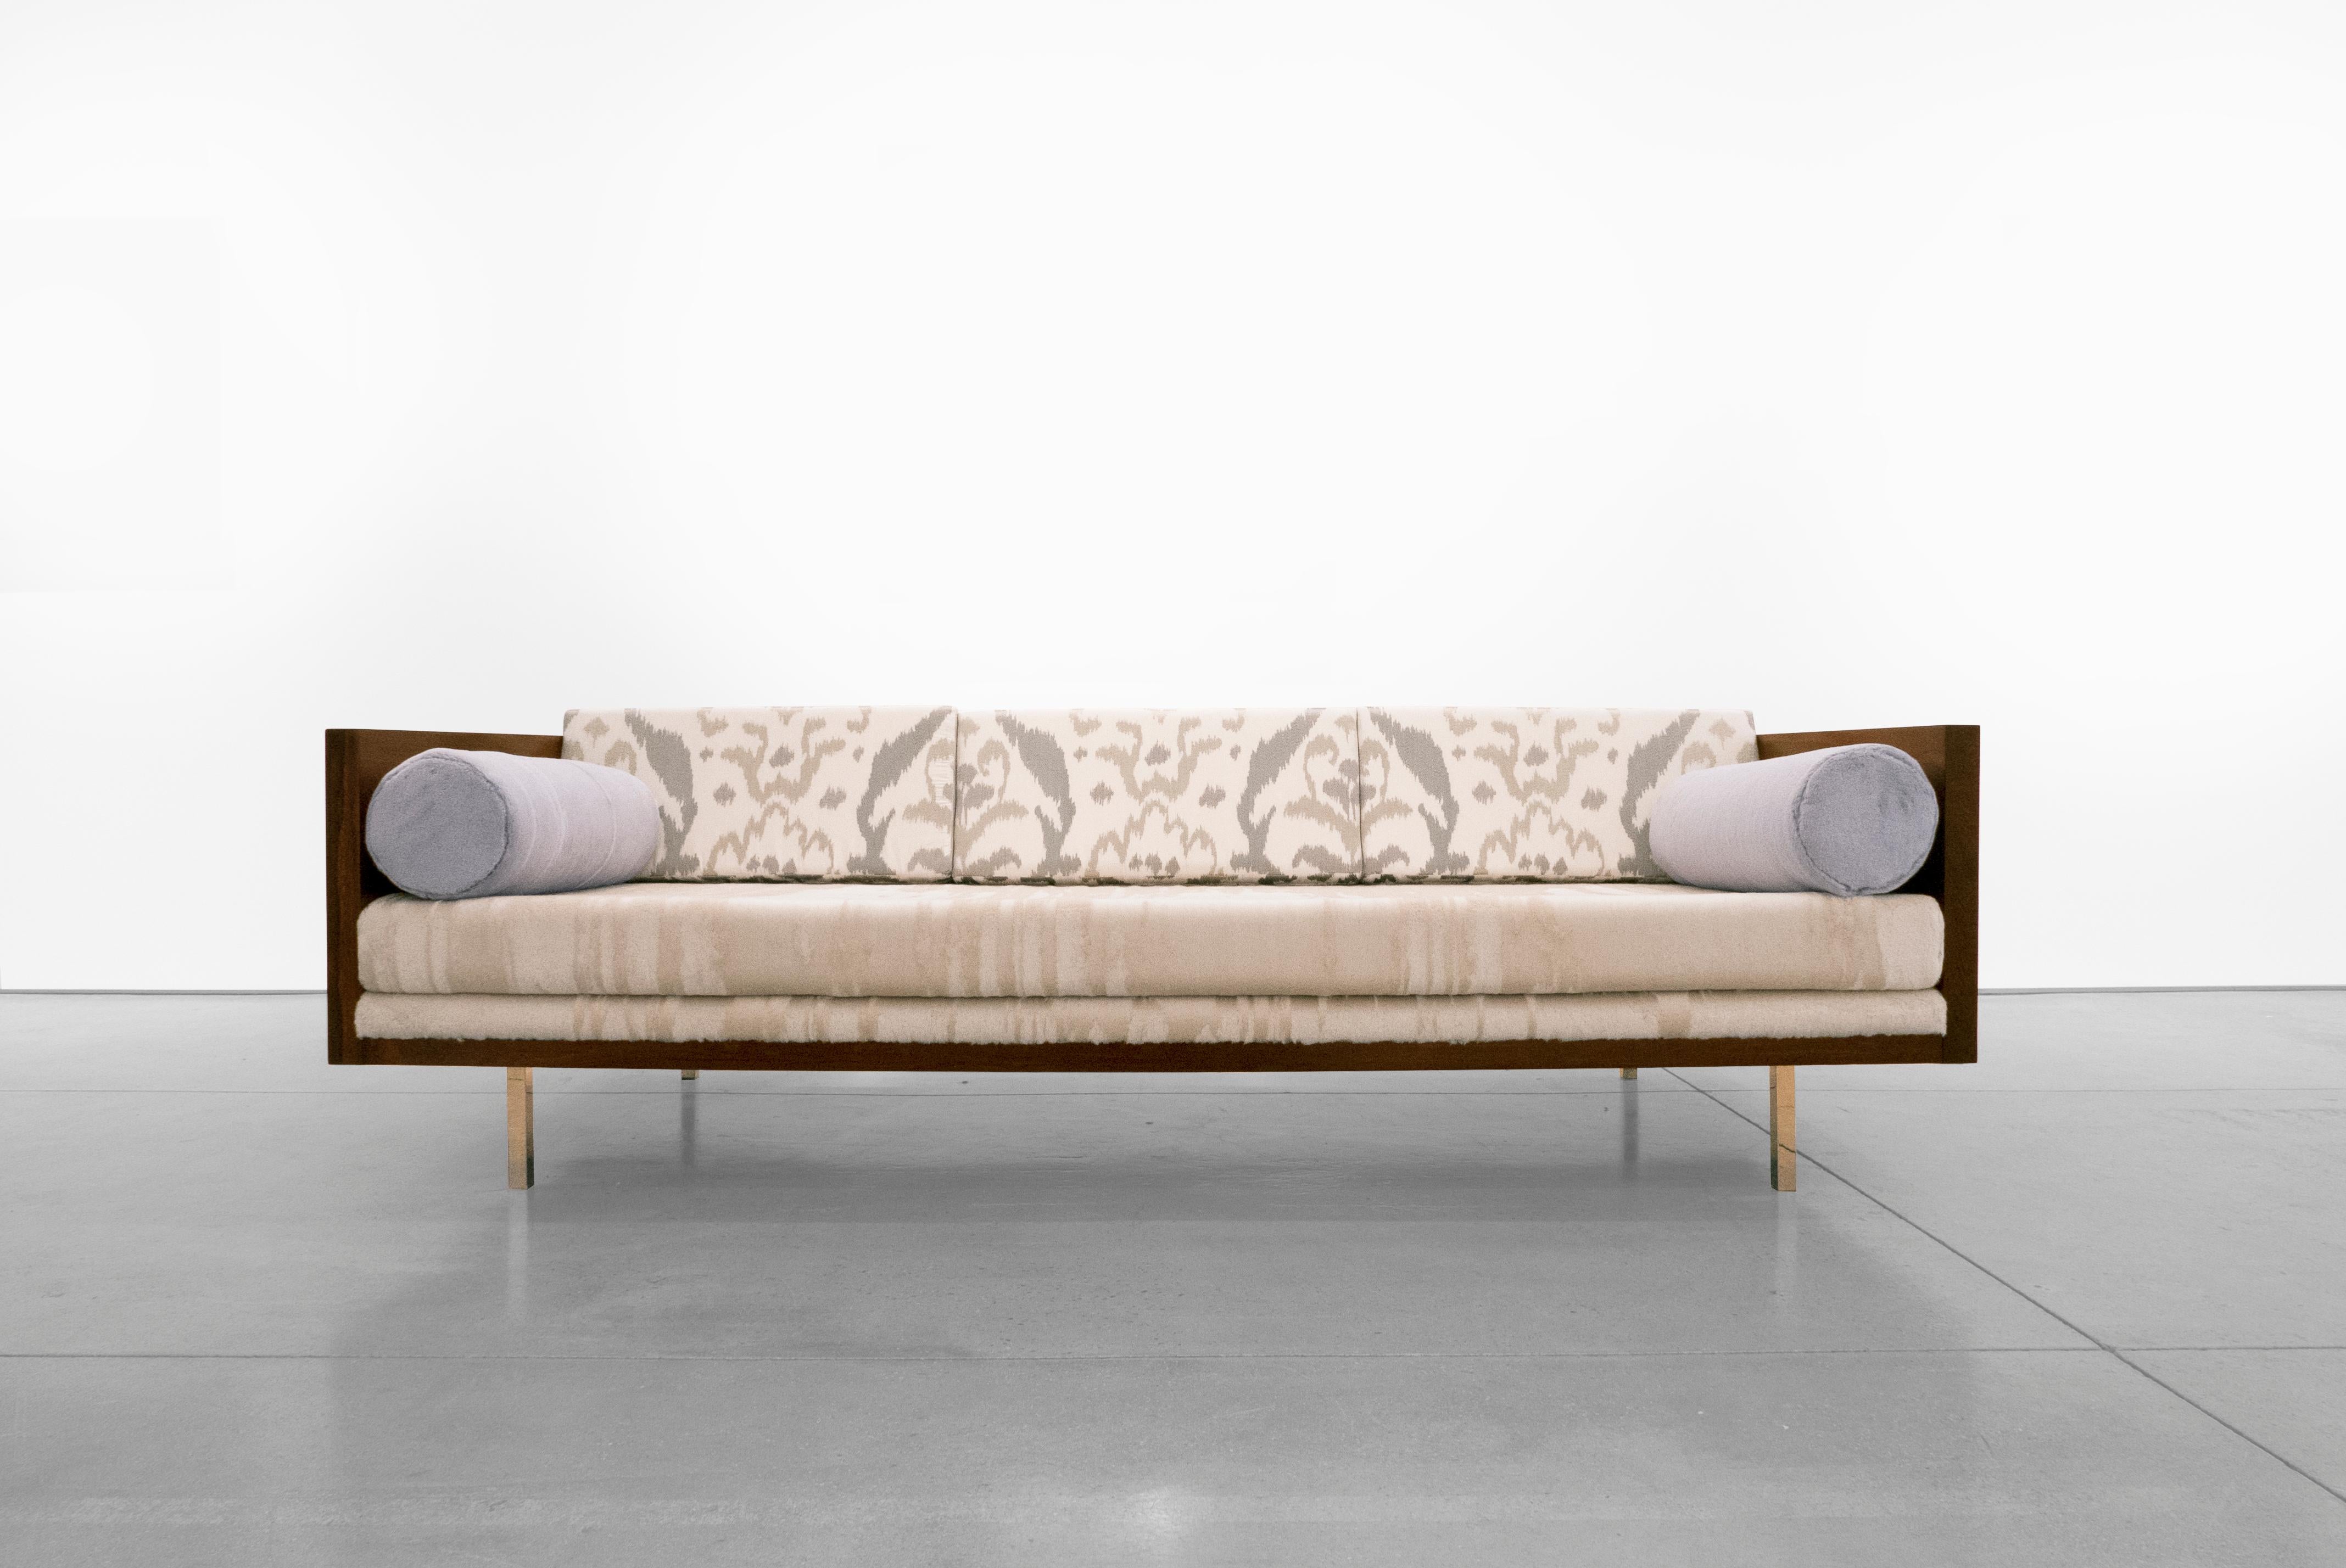 Wrapped rosewood three-seat sofa. Meticulously reupholstered with Dedar Milano fabrics, designed by Milo Baughman in the 1950s.

Milo Baughman brought comfort and ease to the simplicity and functionality of modern furniture. “Furniture that is too